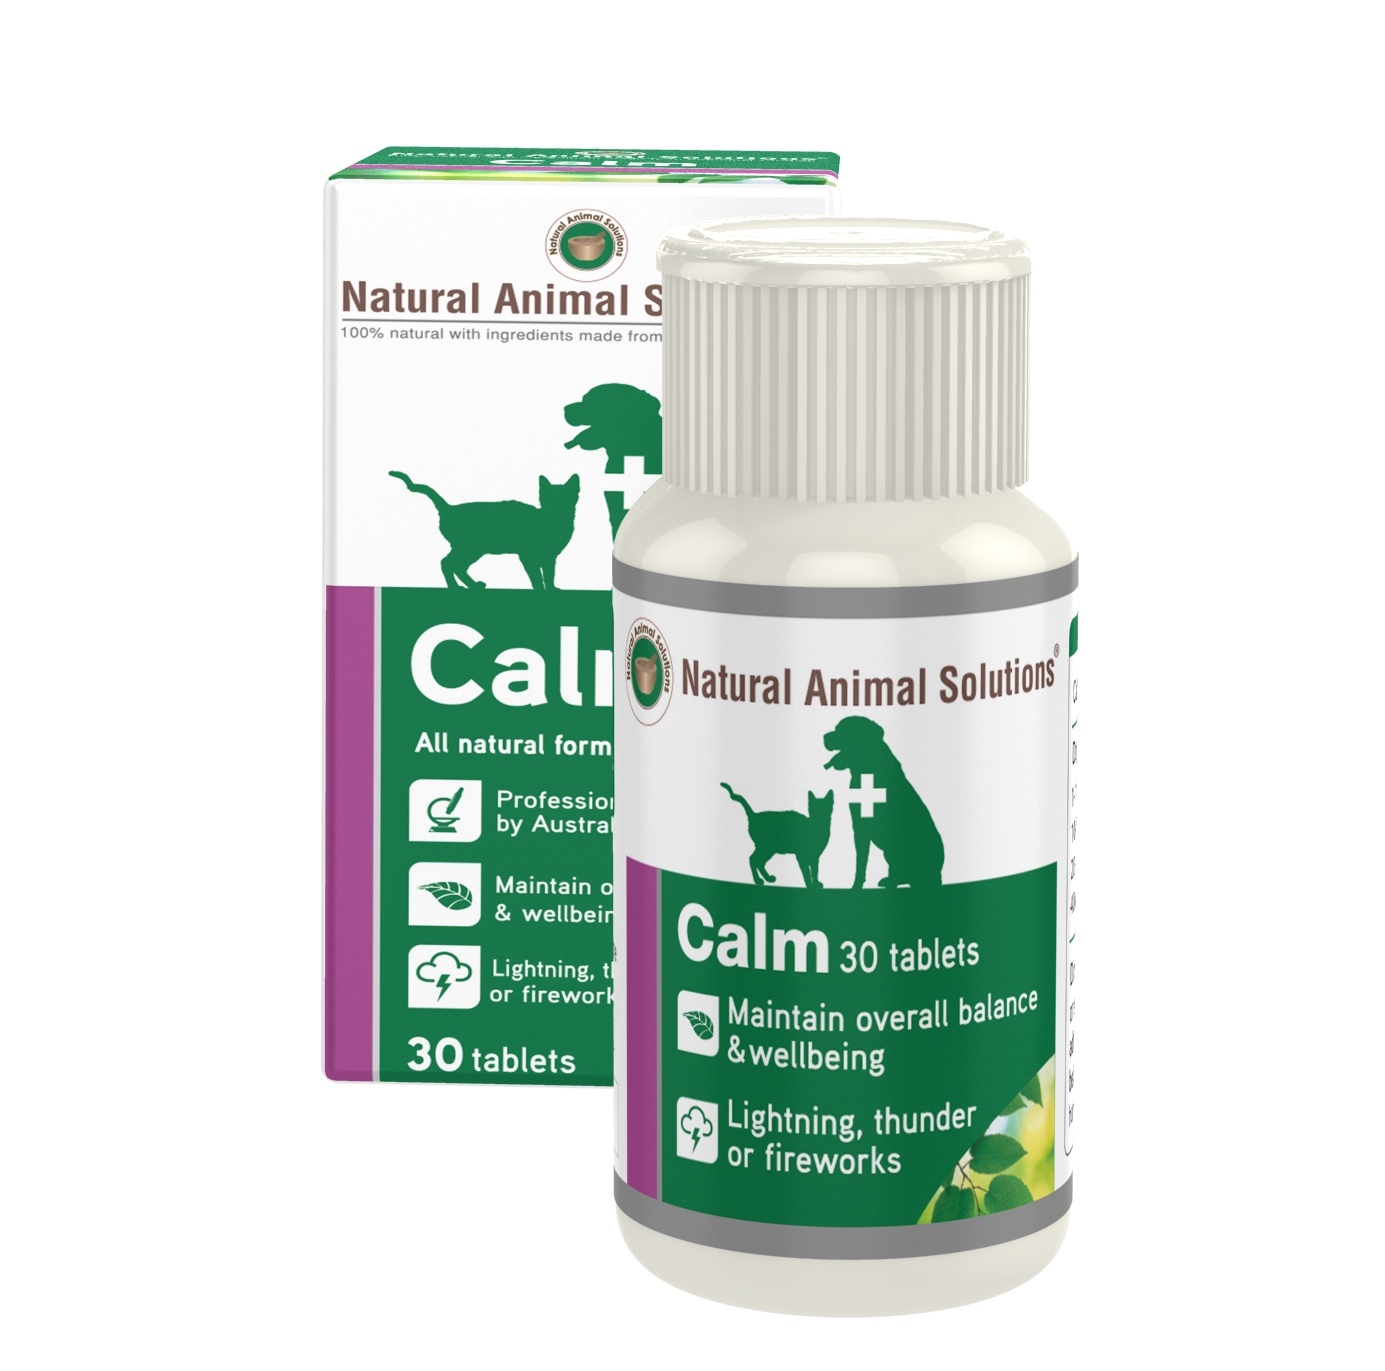 Natural Animal Solutions "Calm" Remedy for Cats & Dogs